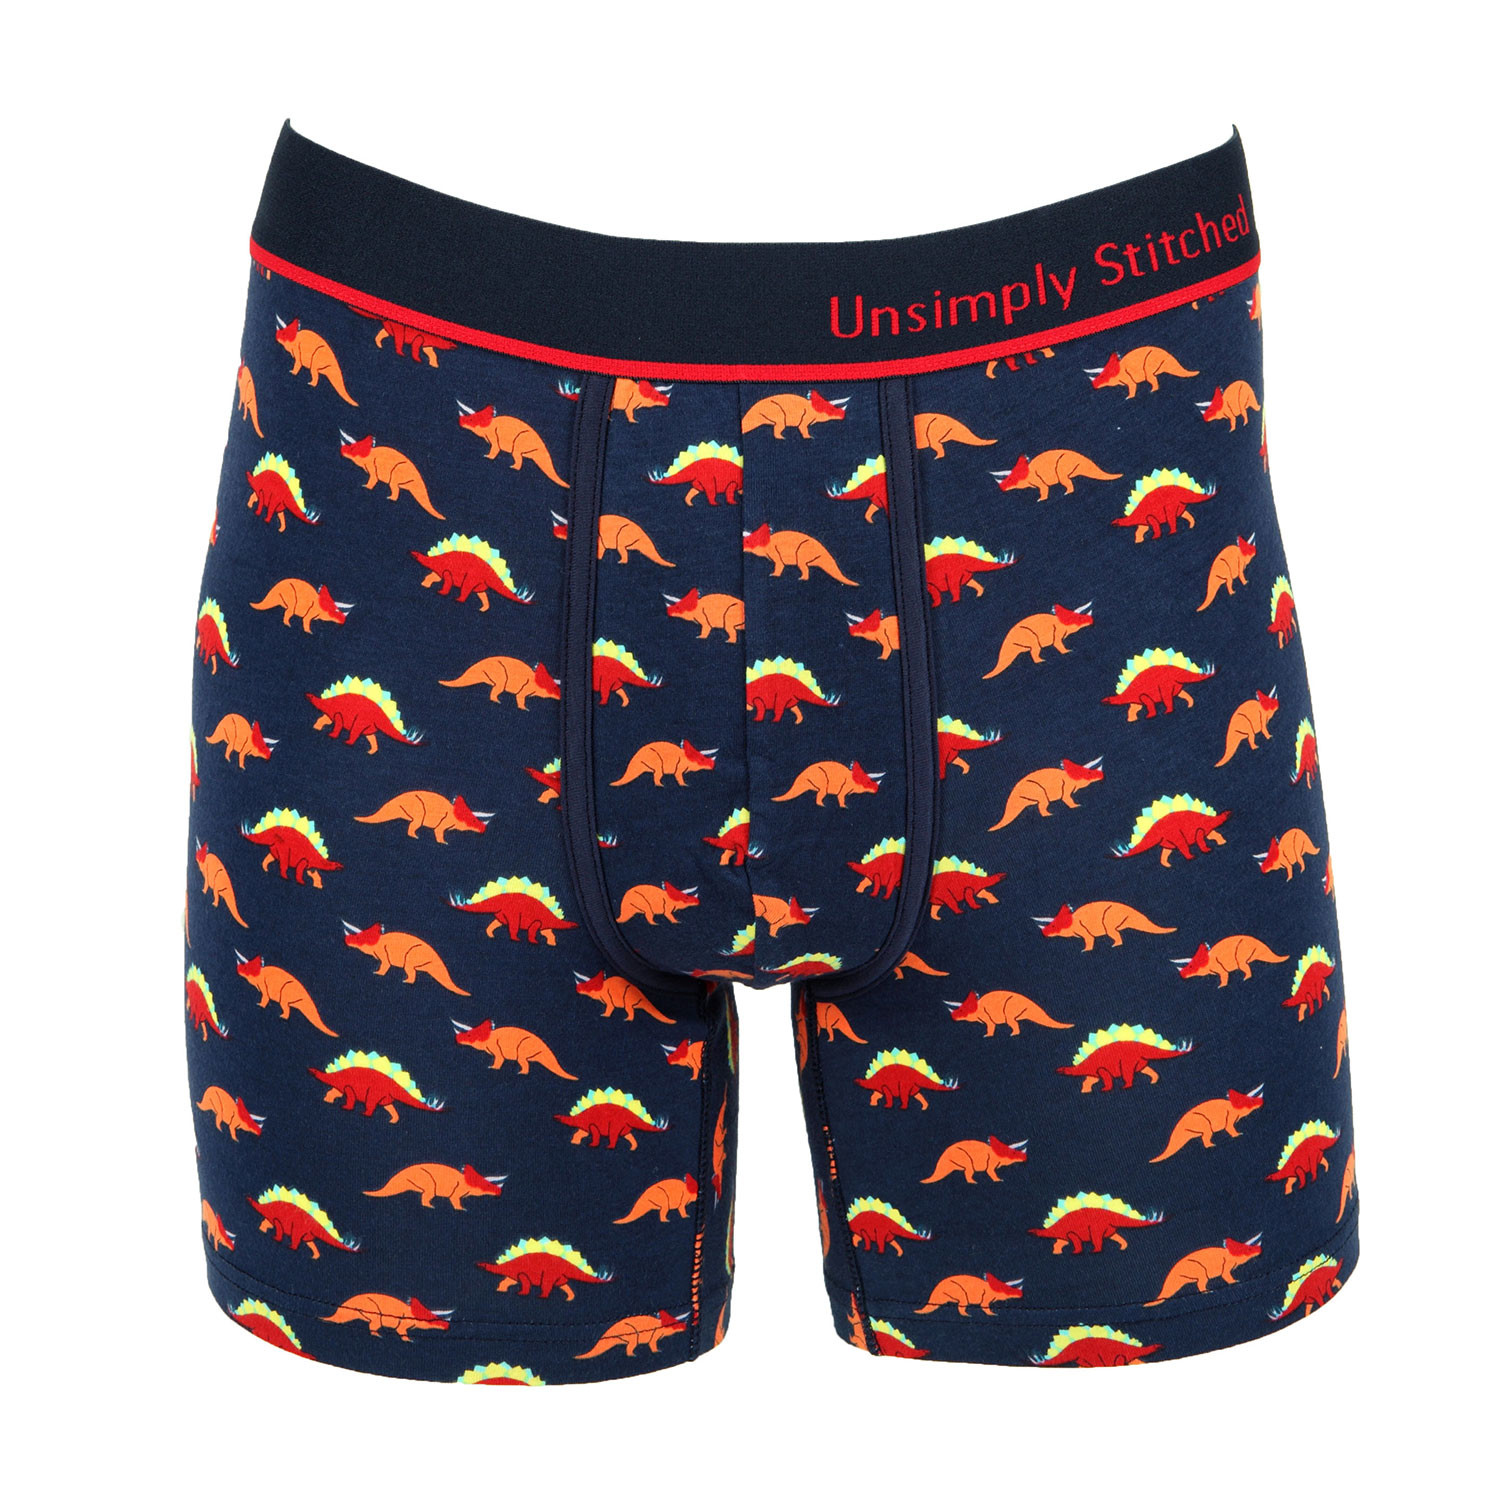 Dinosaur Boxer Brief // Navy (2XL) - Unsimply Stitched - Touch of Modern